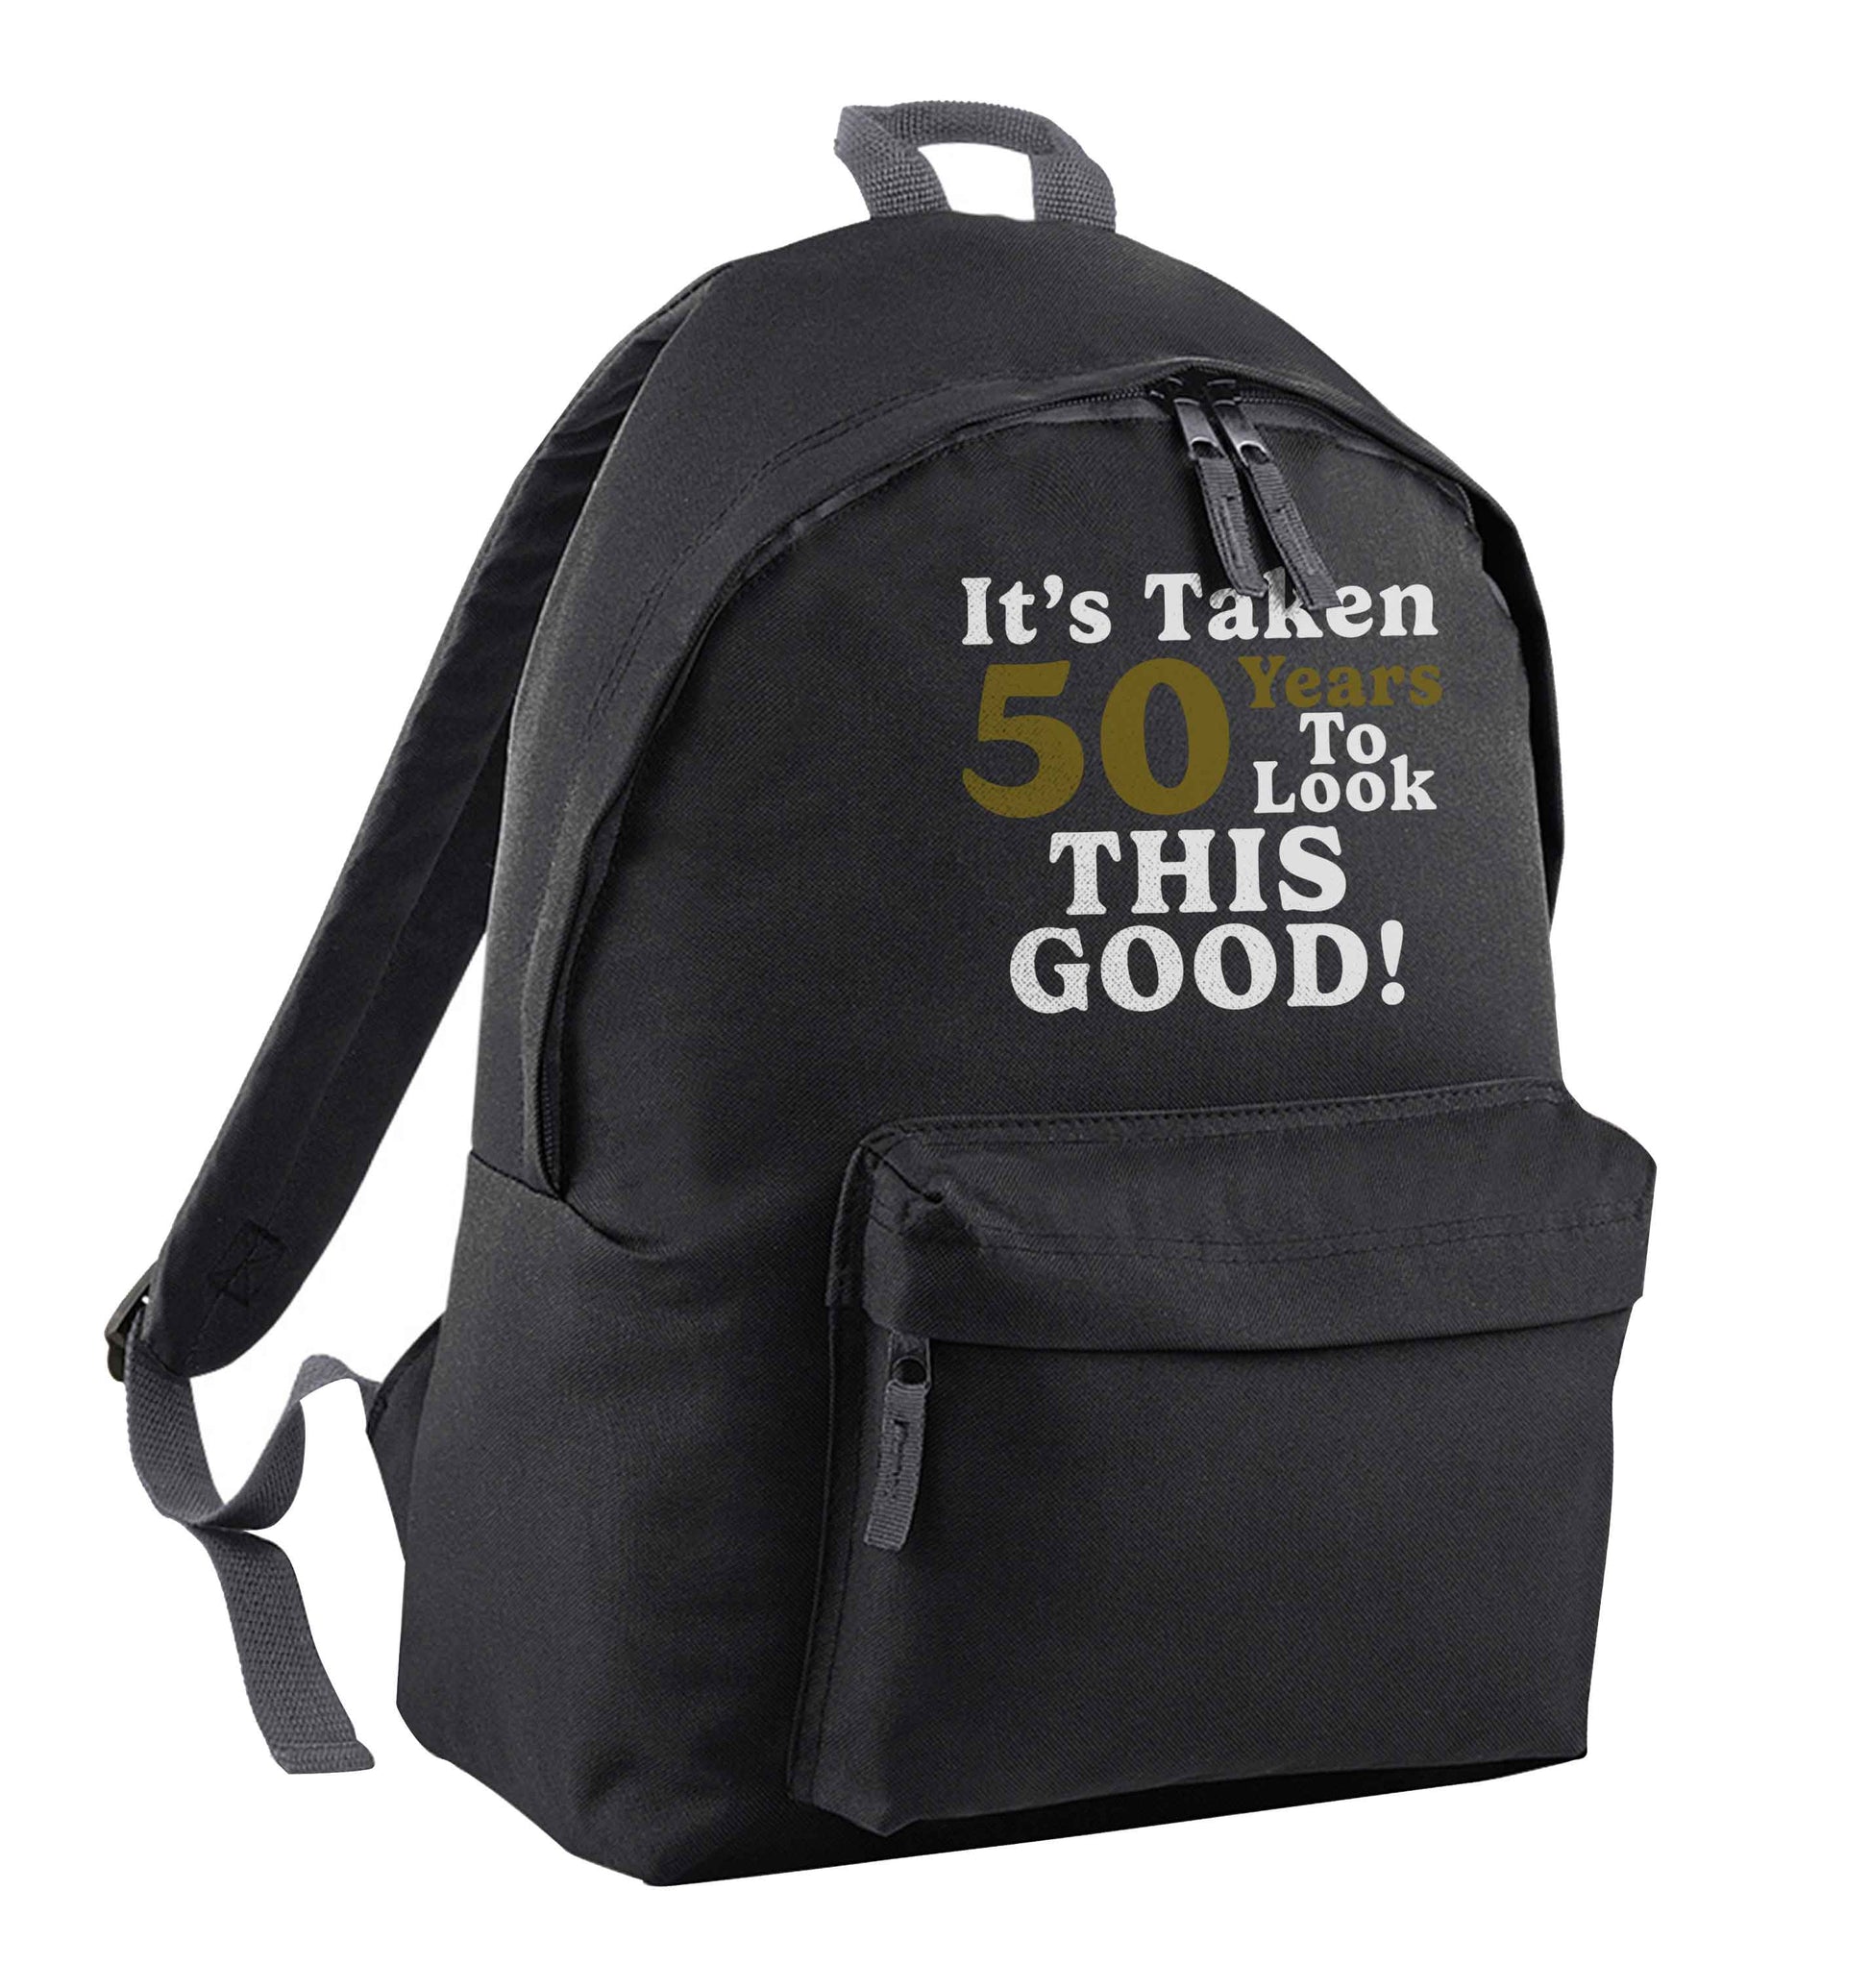 It's taken 50 years to look this good! black adults backpack